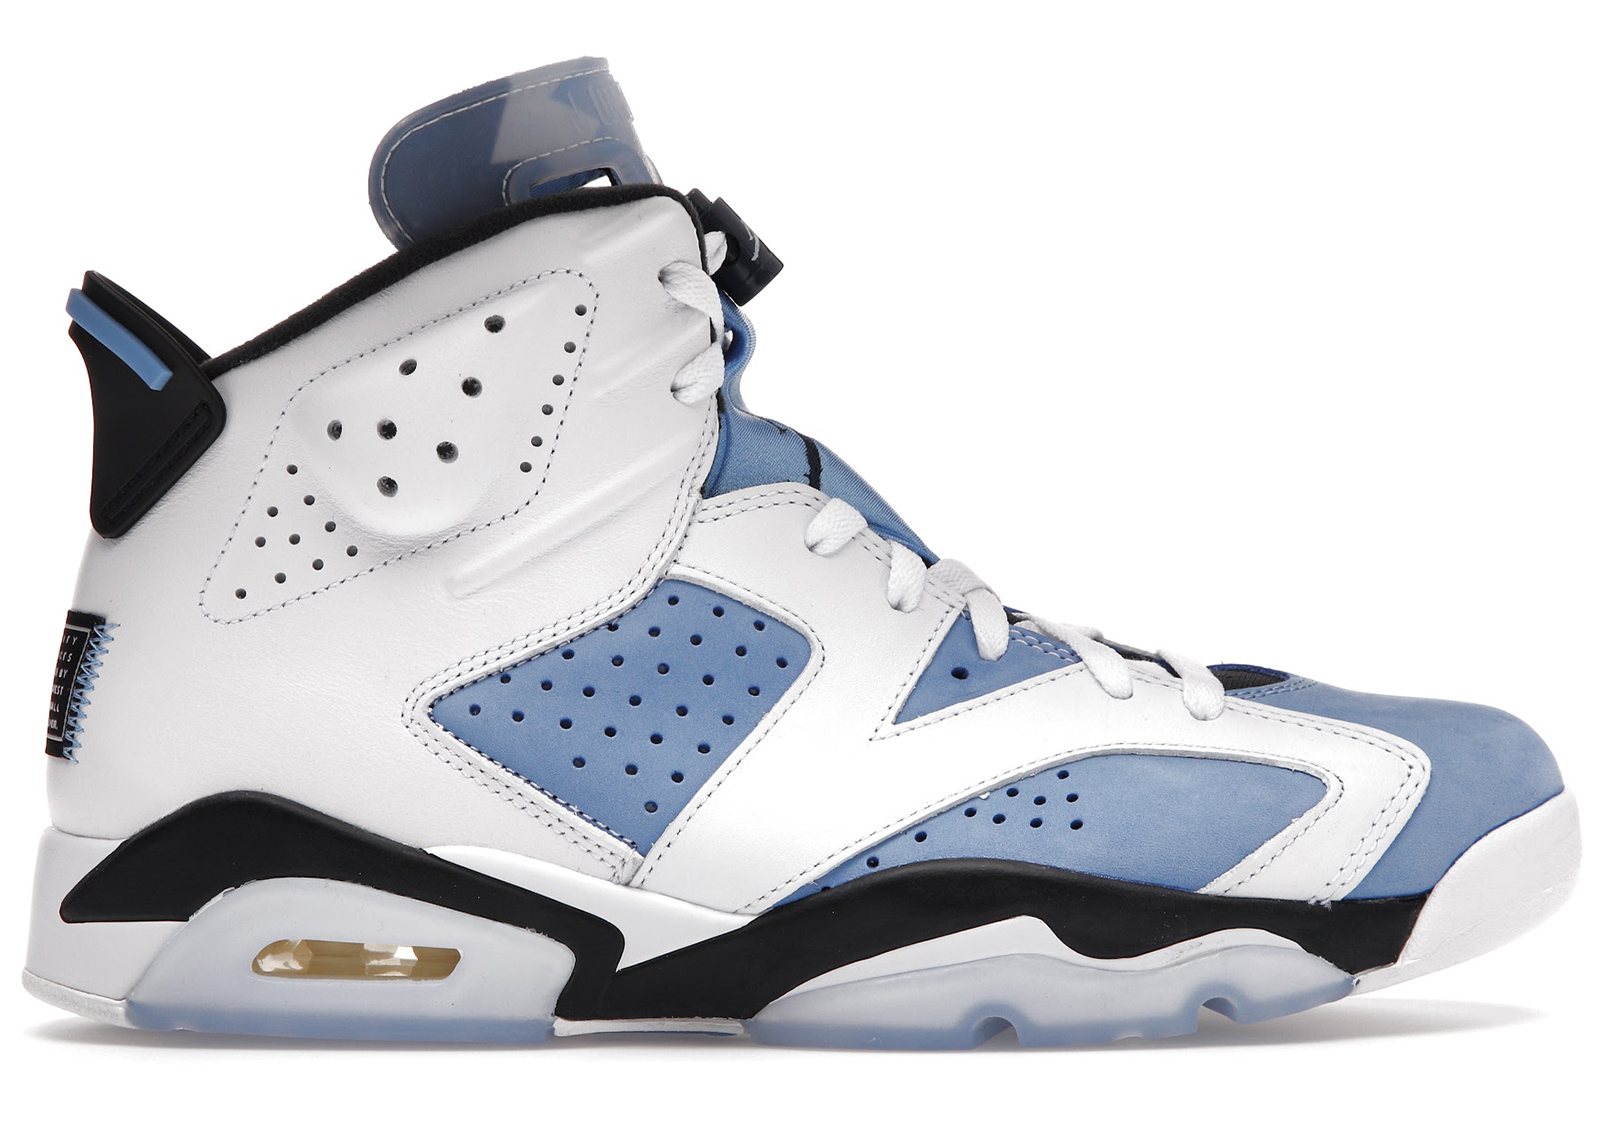 Jordan 6 - All Sizes & Colorways from $71 at StockX